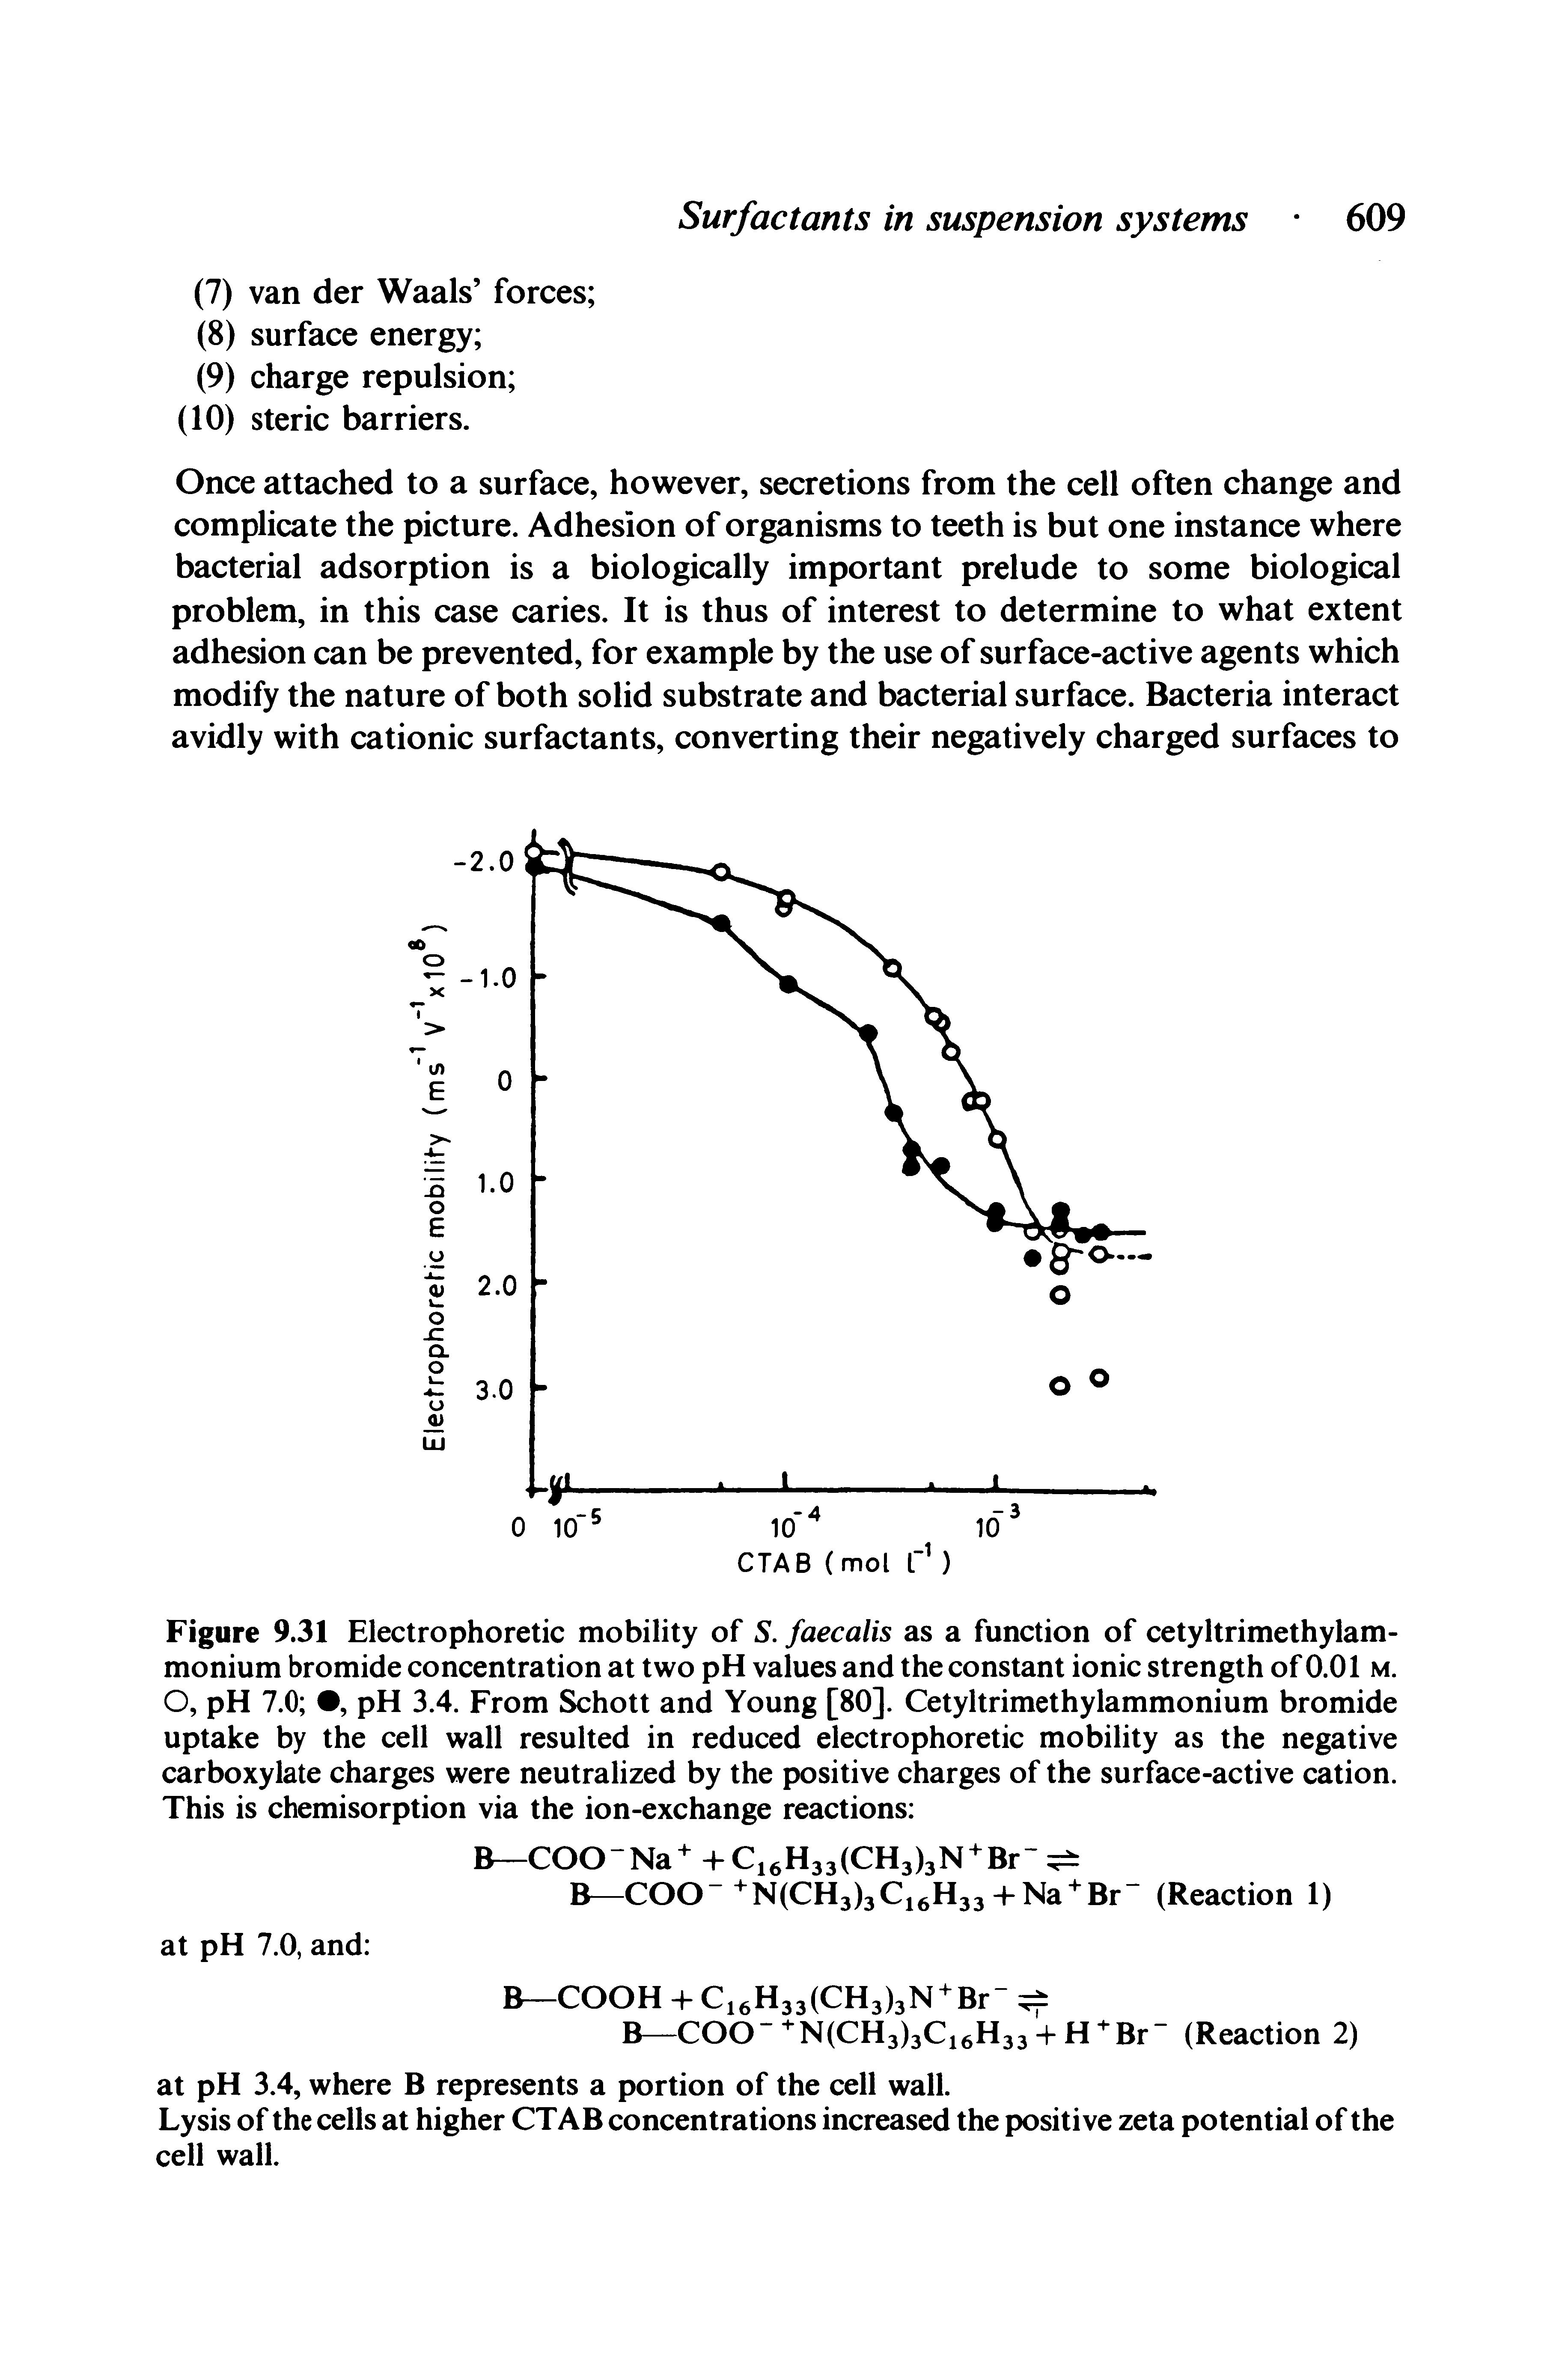 Figure 9.31 Electrophoretic mobility of S. faecalis as a function of cetyltrimethylam-monium bromide concentration at two pH values and the constant ionic strength of 0.01 m. O, pH 7.0 , pH 3.4. From Schott and Young [80]. Cetyltrimethylammonium bromide uptake by the cell wall resulted in reduced electrophoretic mobility as the negative carboxylate charges were neutralized by the positive charges of the surface-active cation. This is chemisorption via the ion-exchange reactions ...